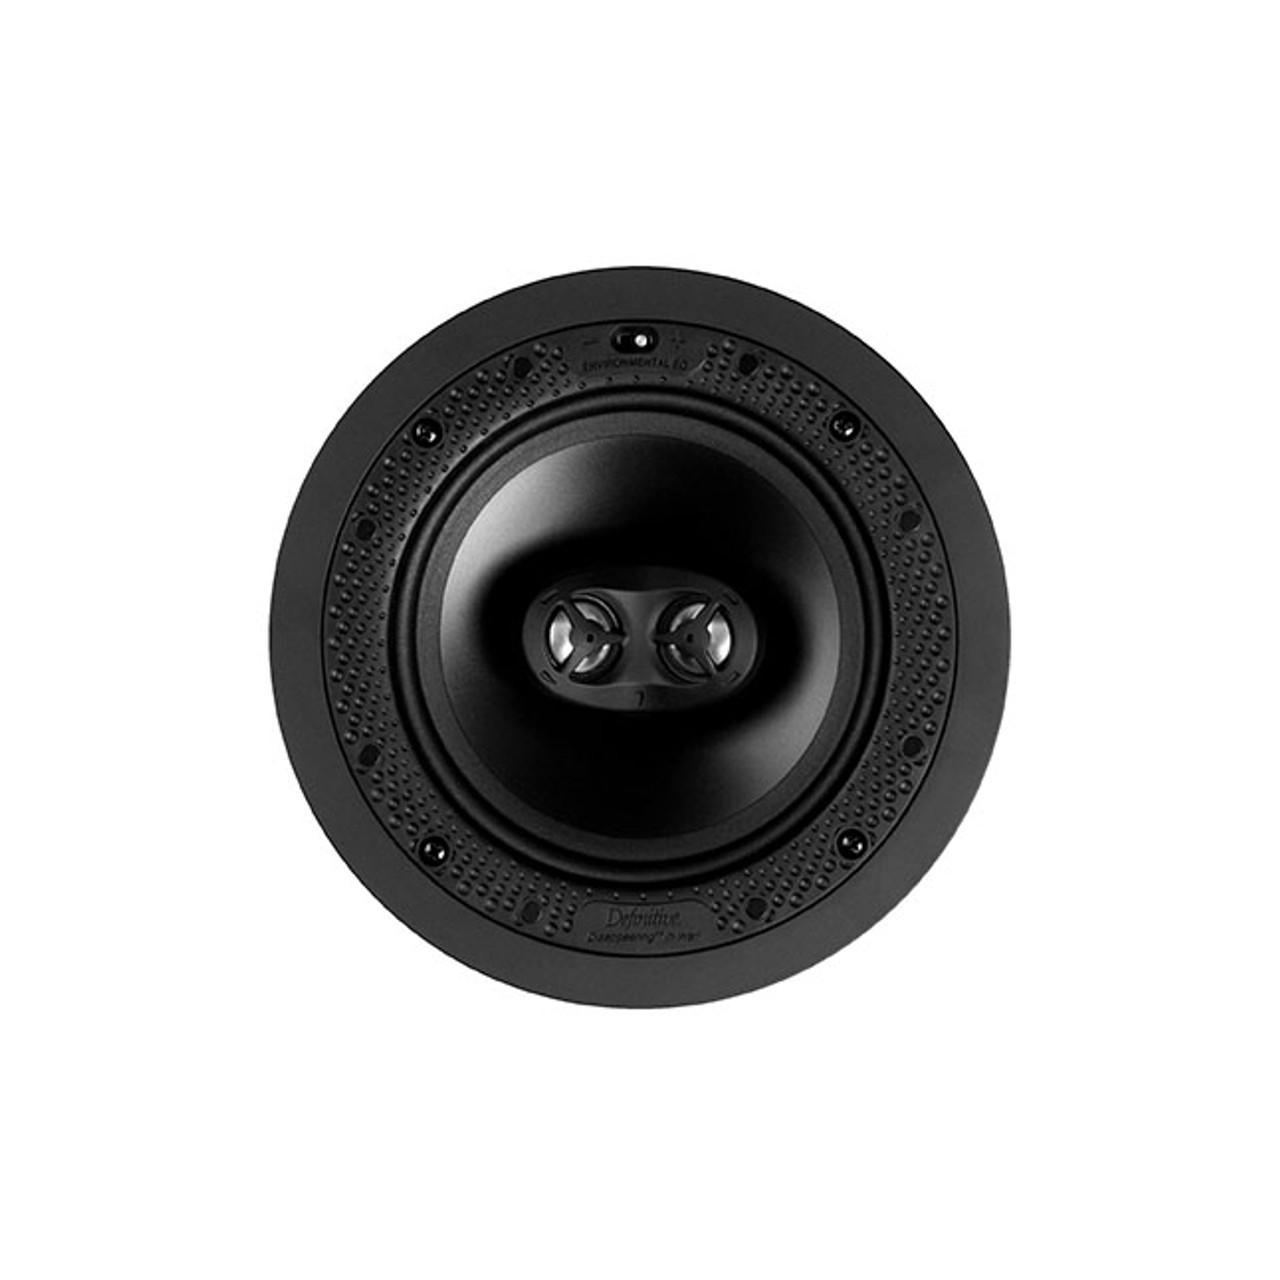 Definitive Technology DI 6.5STR Disappearing Series 6.5" In-Ceiling Stereo Speaker (Each)